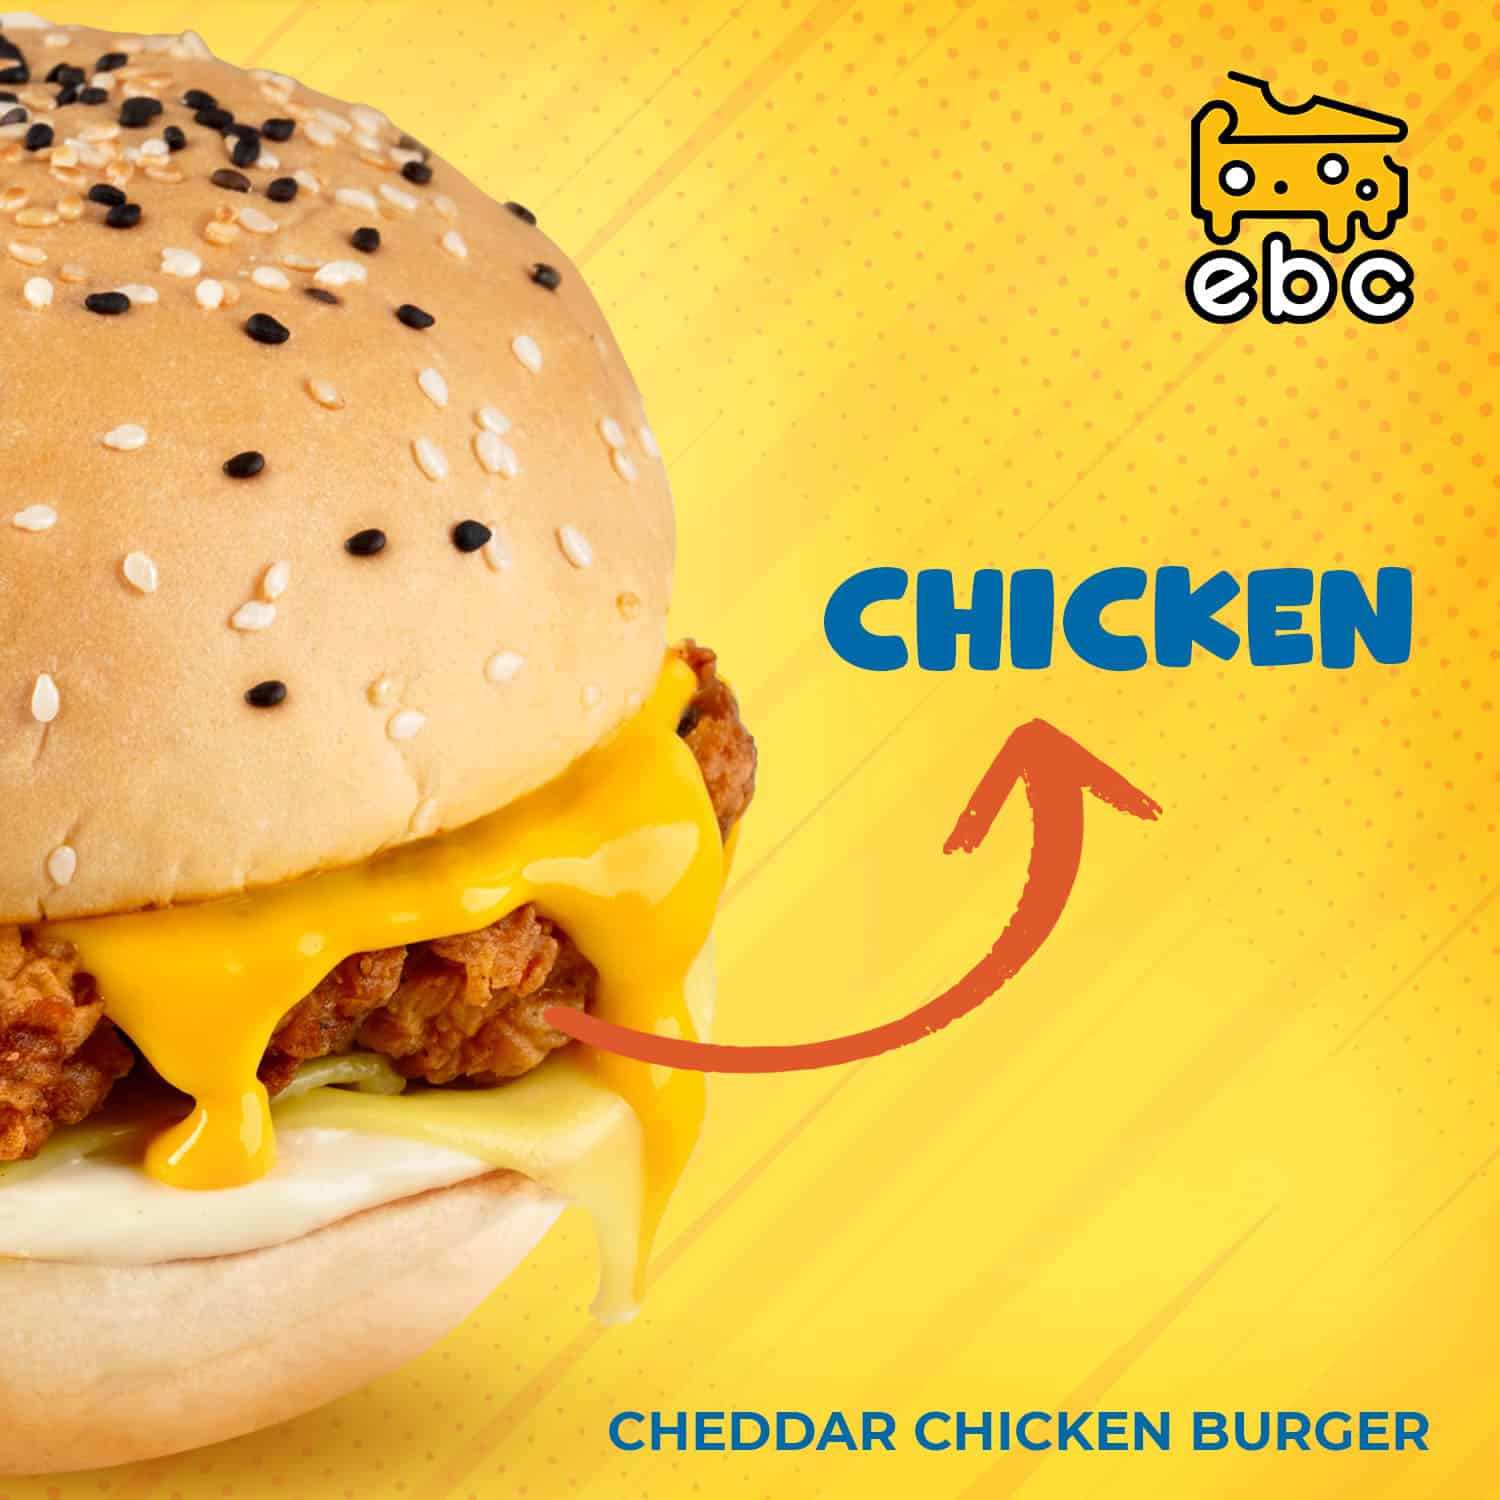 Cheddar Chicken Burger on Everything But Cheese Menu Philippines